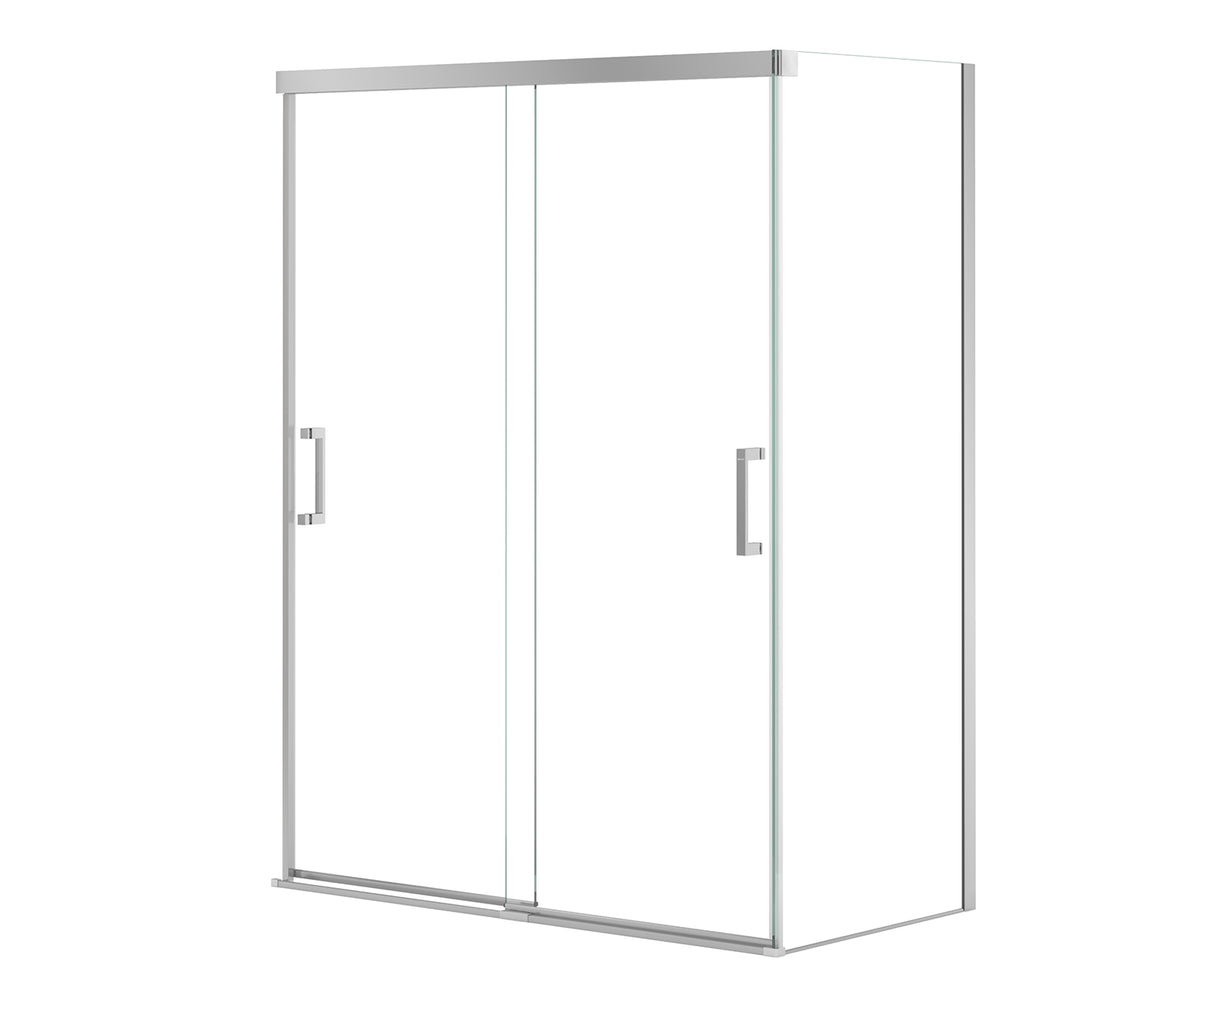 MAAX 136560-900-084-000 Incognito 76 Return Panel for 32 in. Base with Clear glass in Chrome